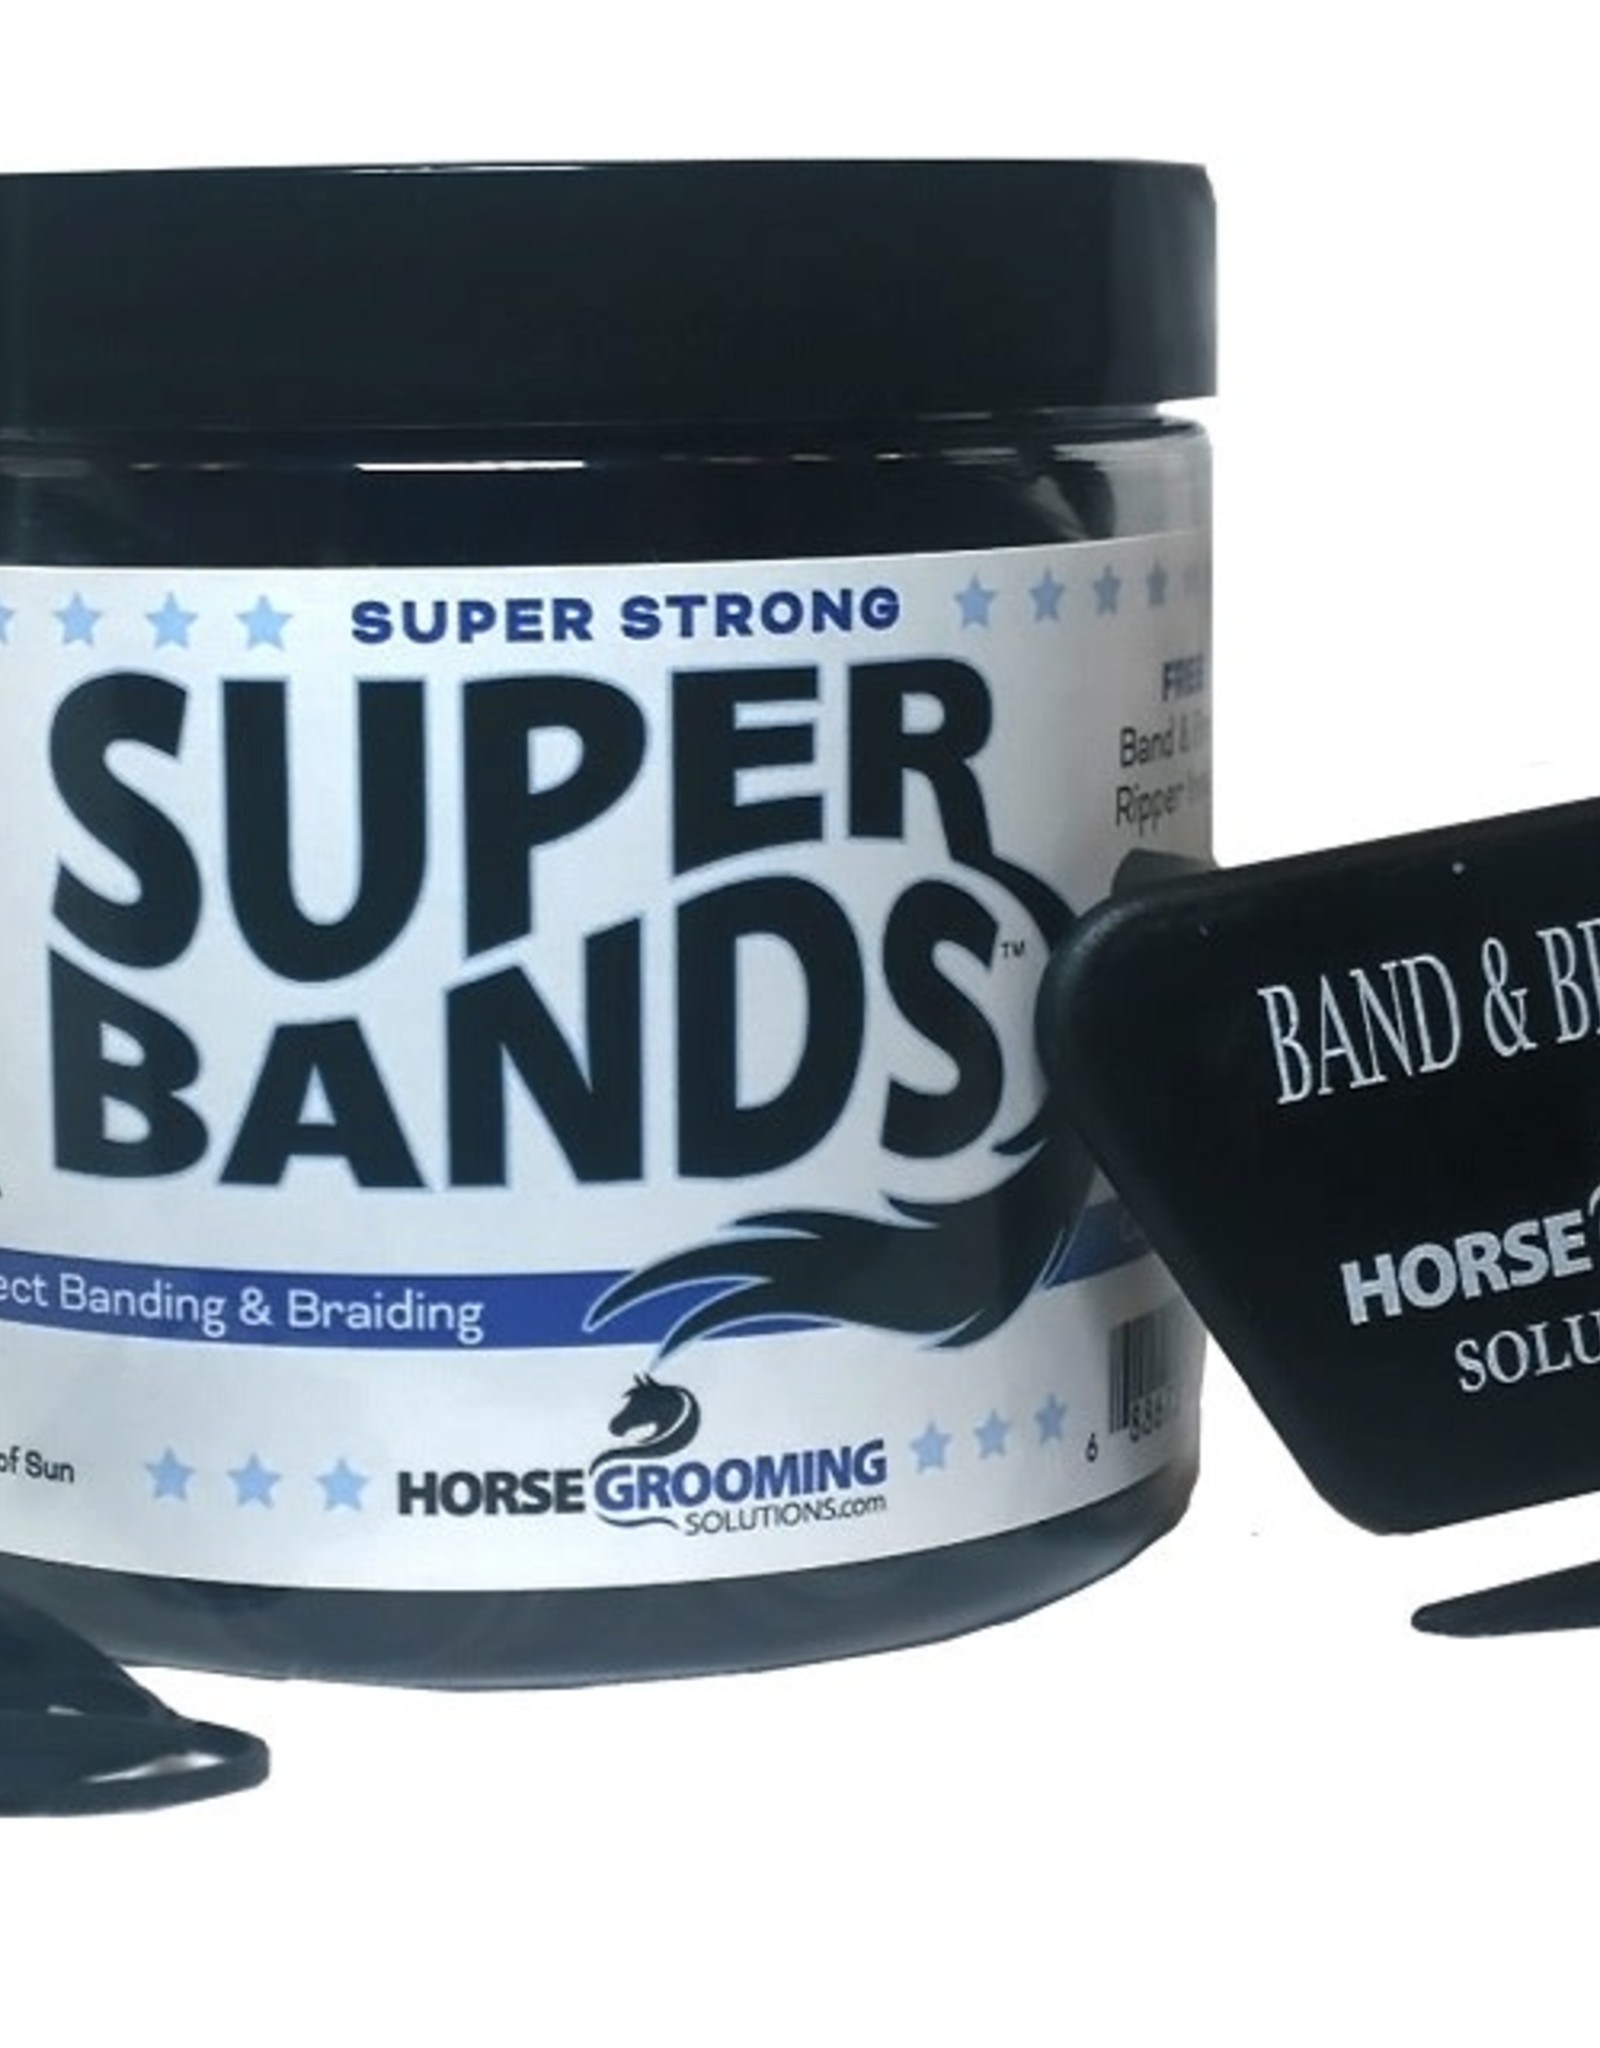 Healthy Haircare Super Bands